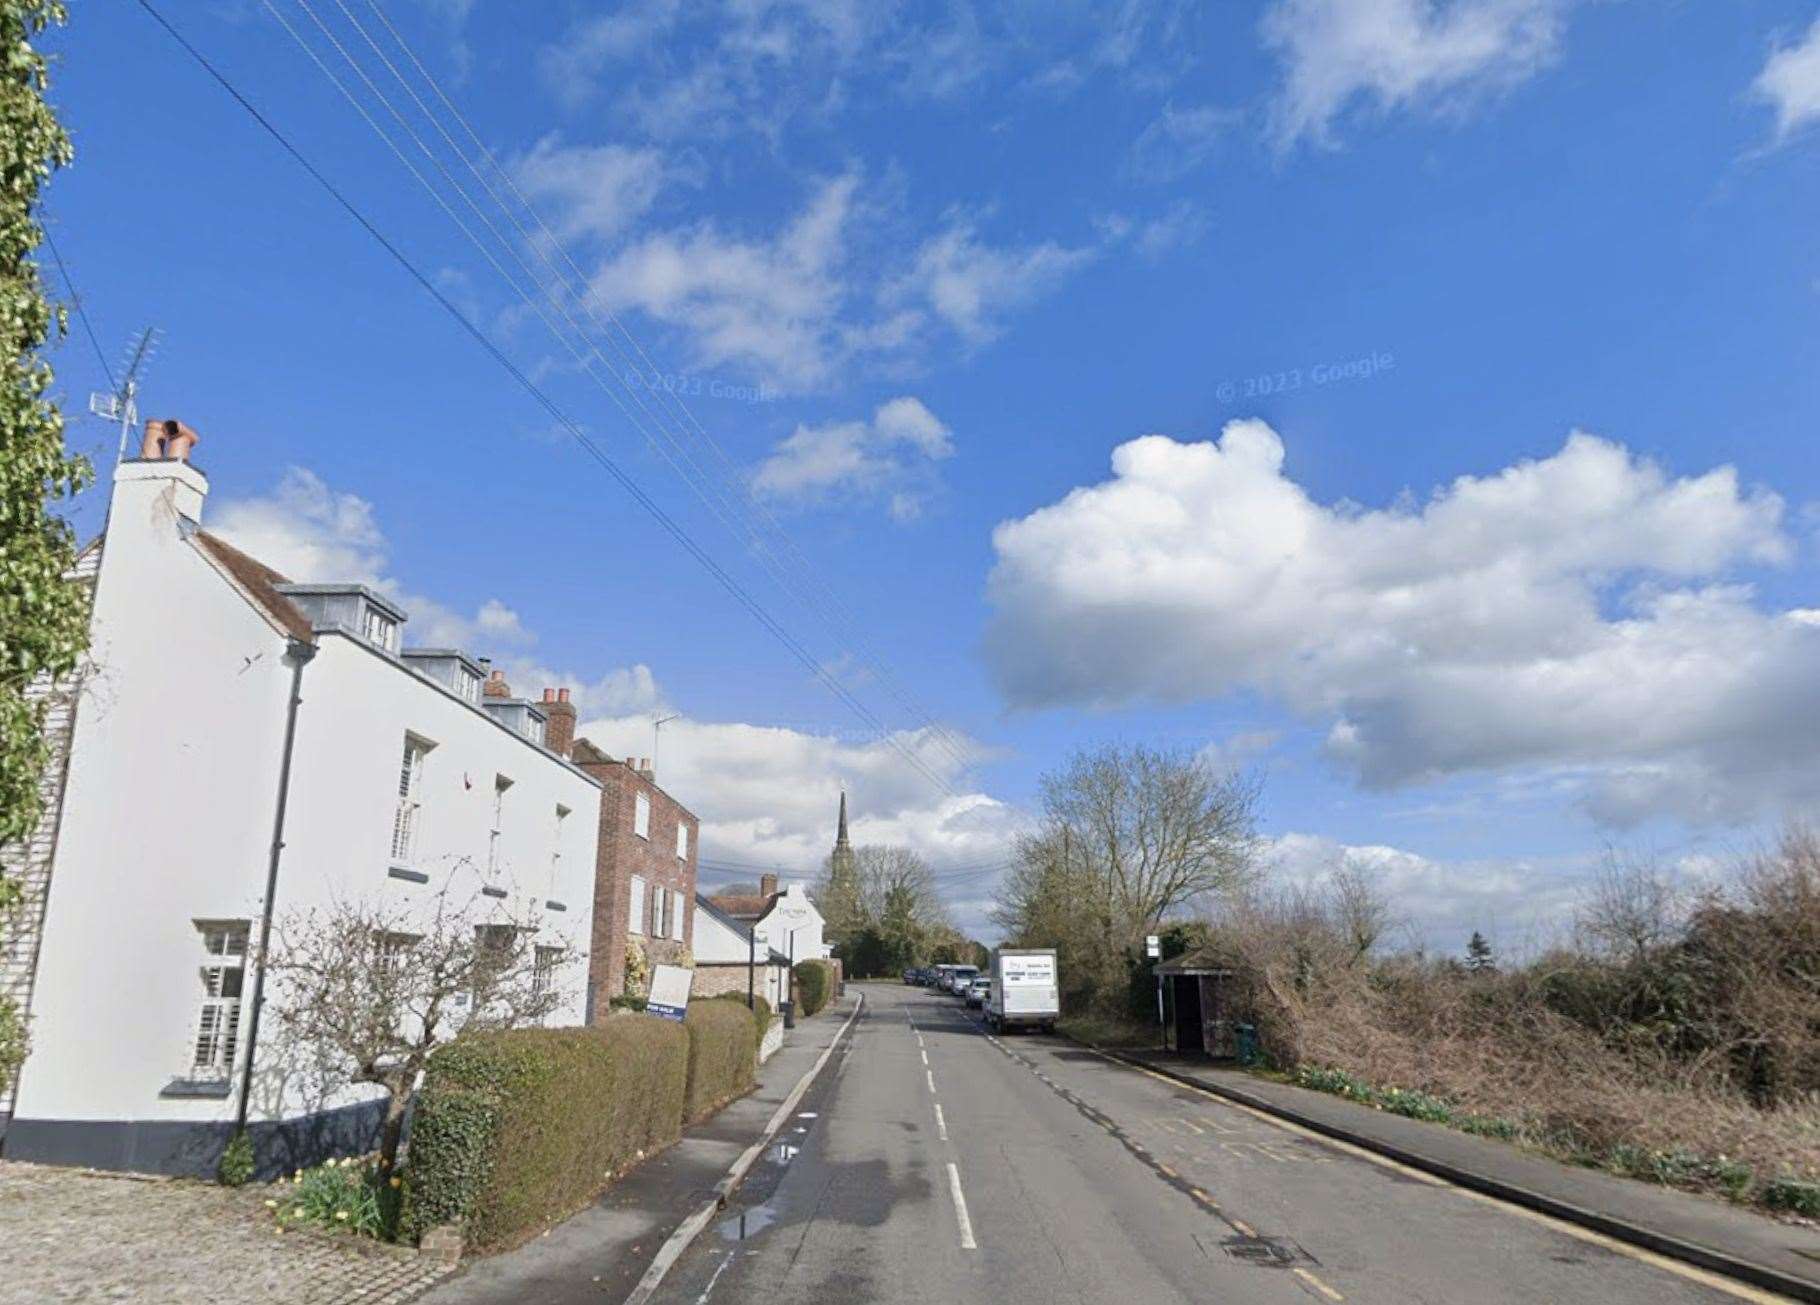 More than £10,000 worth of telephone cable was reportedly stolen near The Street overnight in Mereworth, near Maidstone. Picture: Google Maps